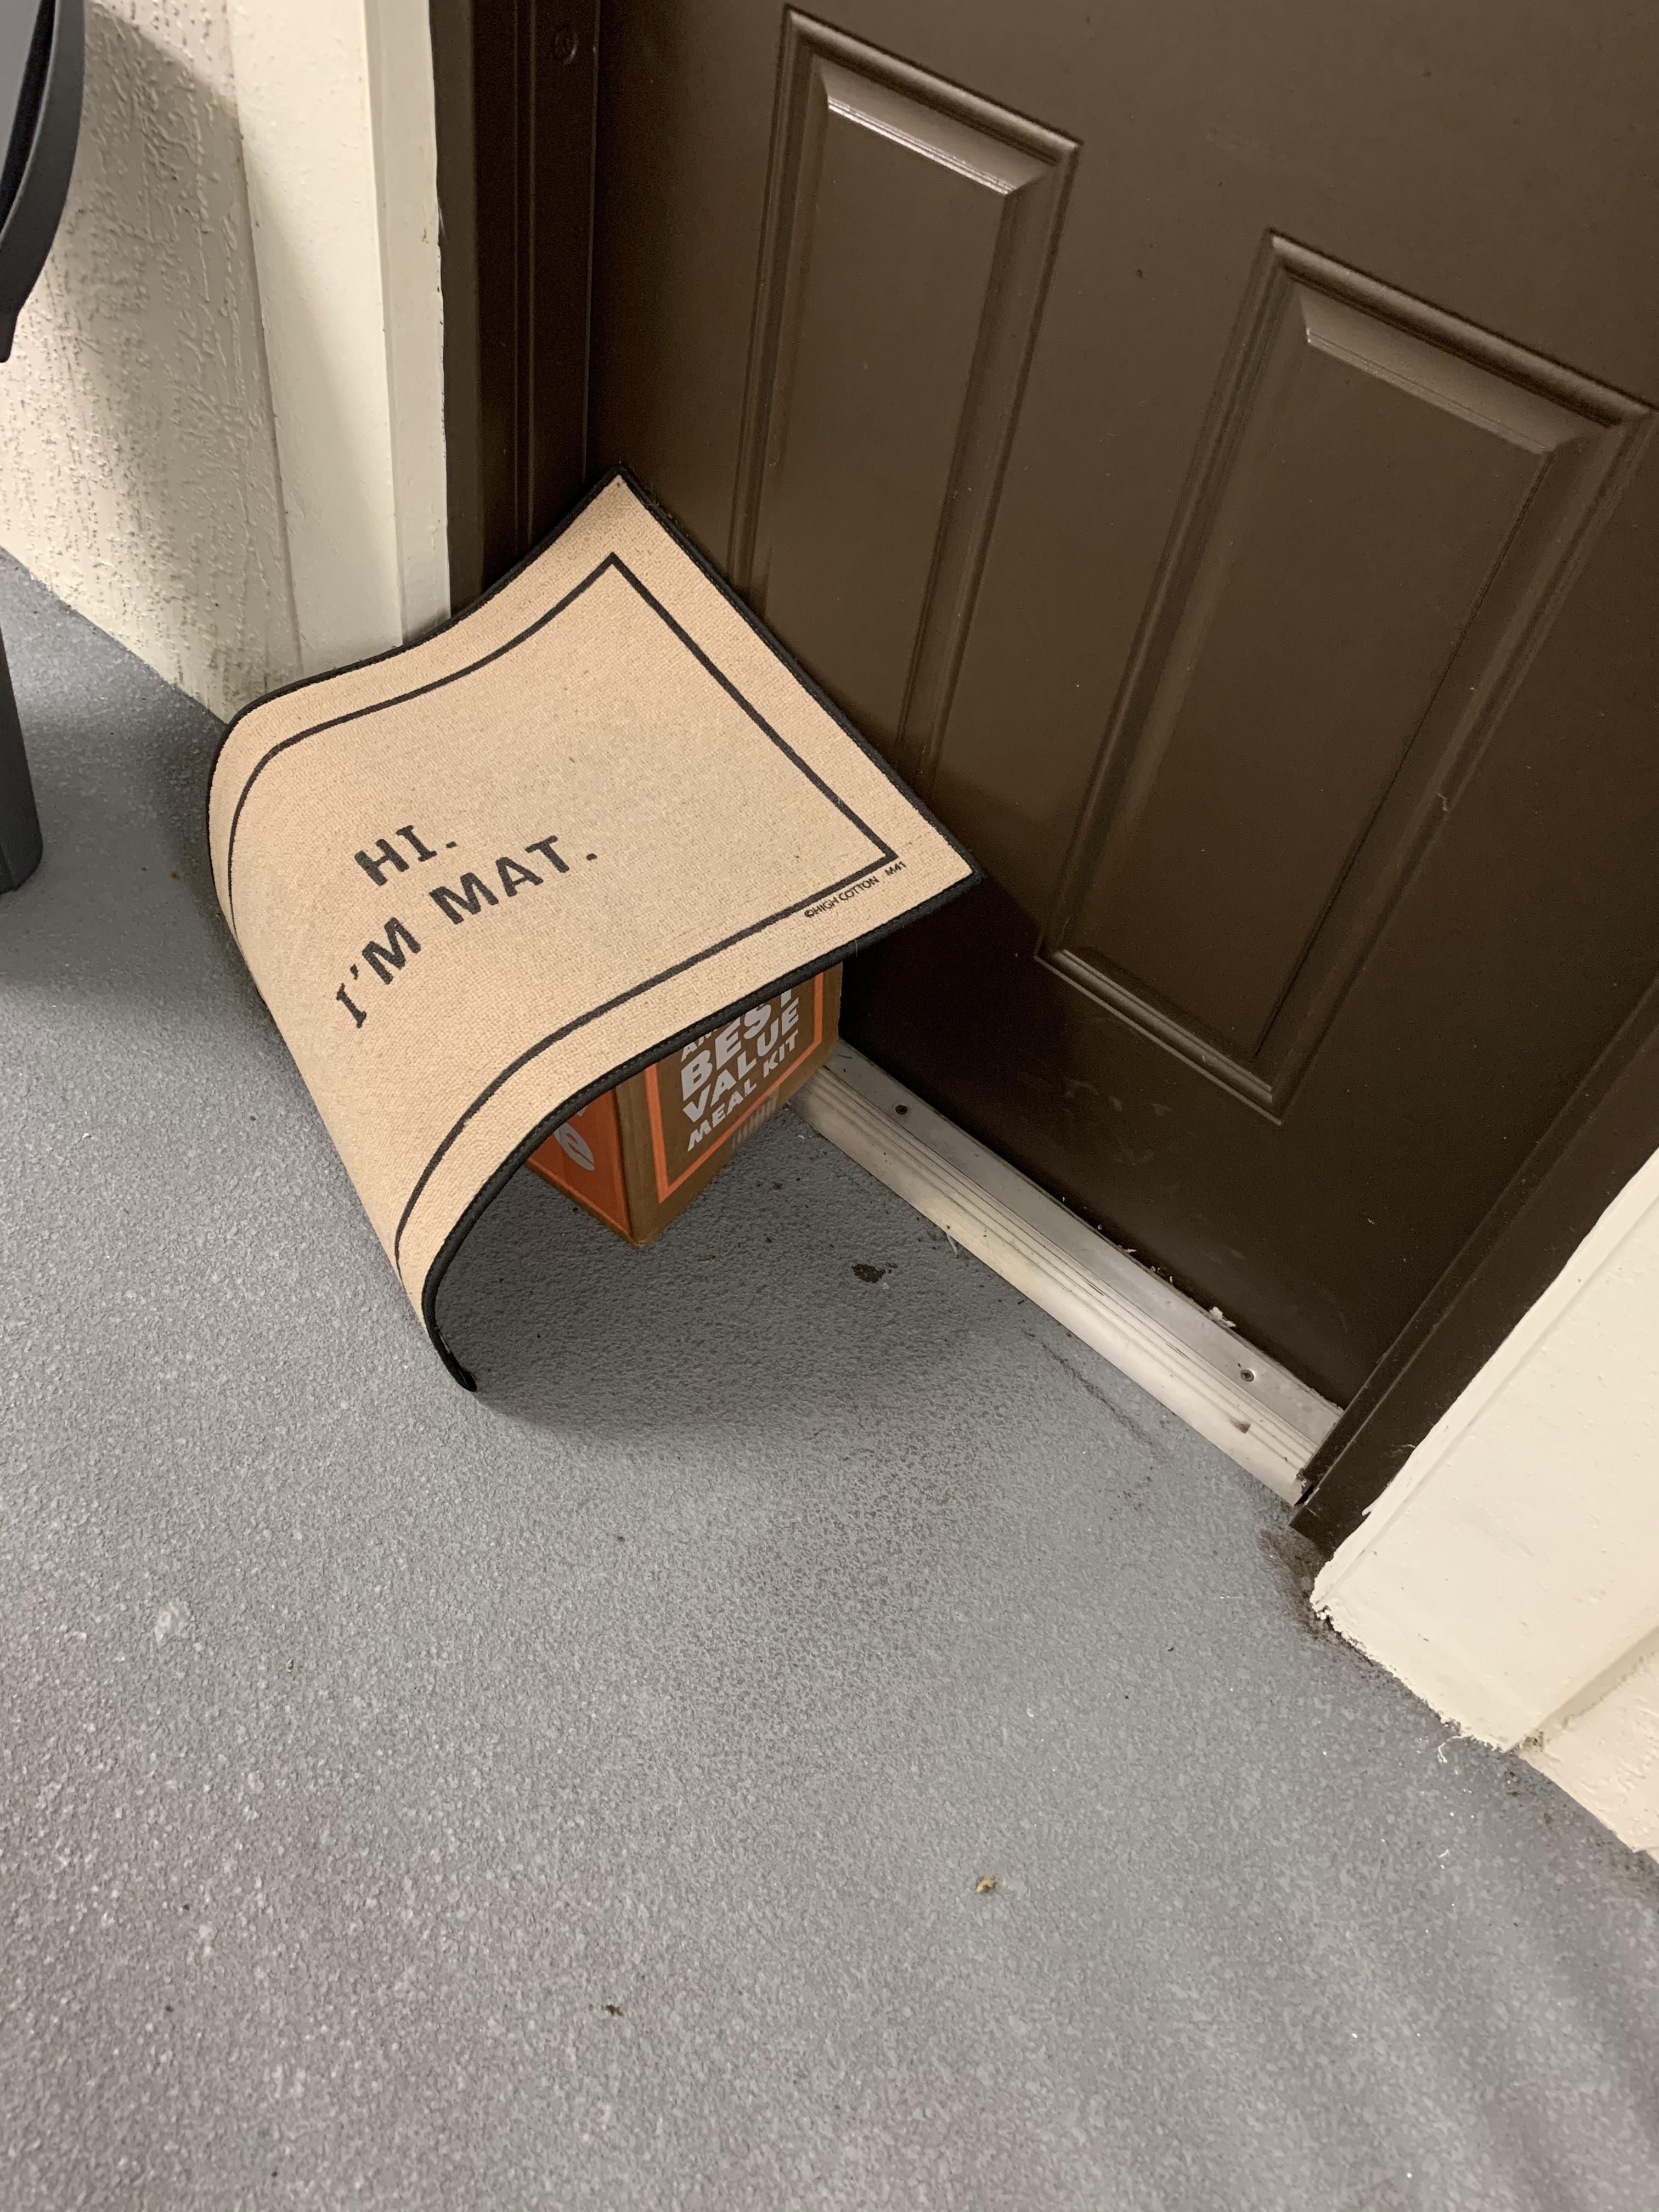 I came home to a postman’s noble attempt to hide my package. Nobody will suspect a thing